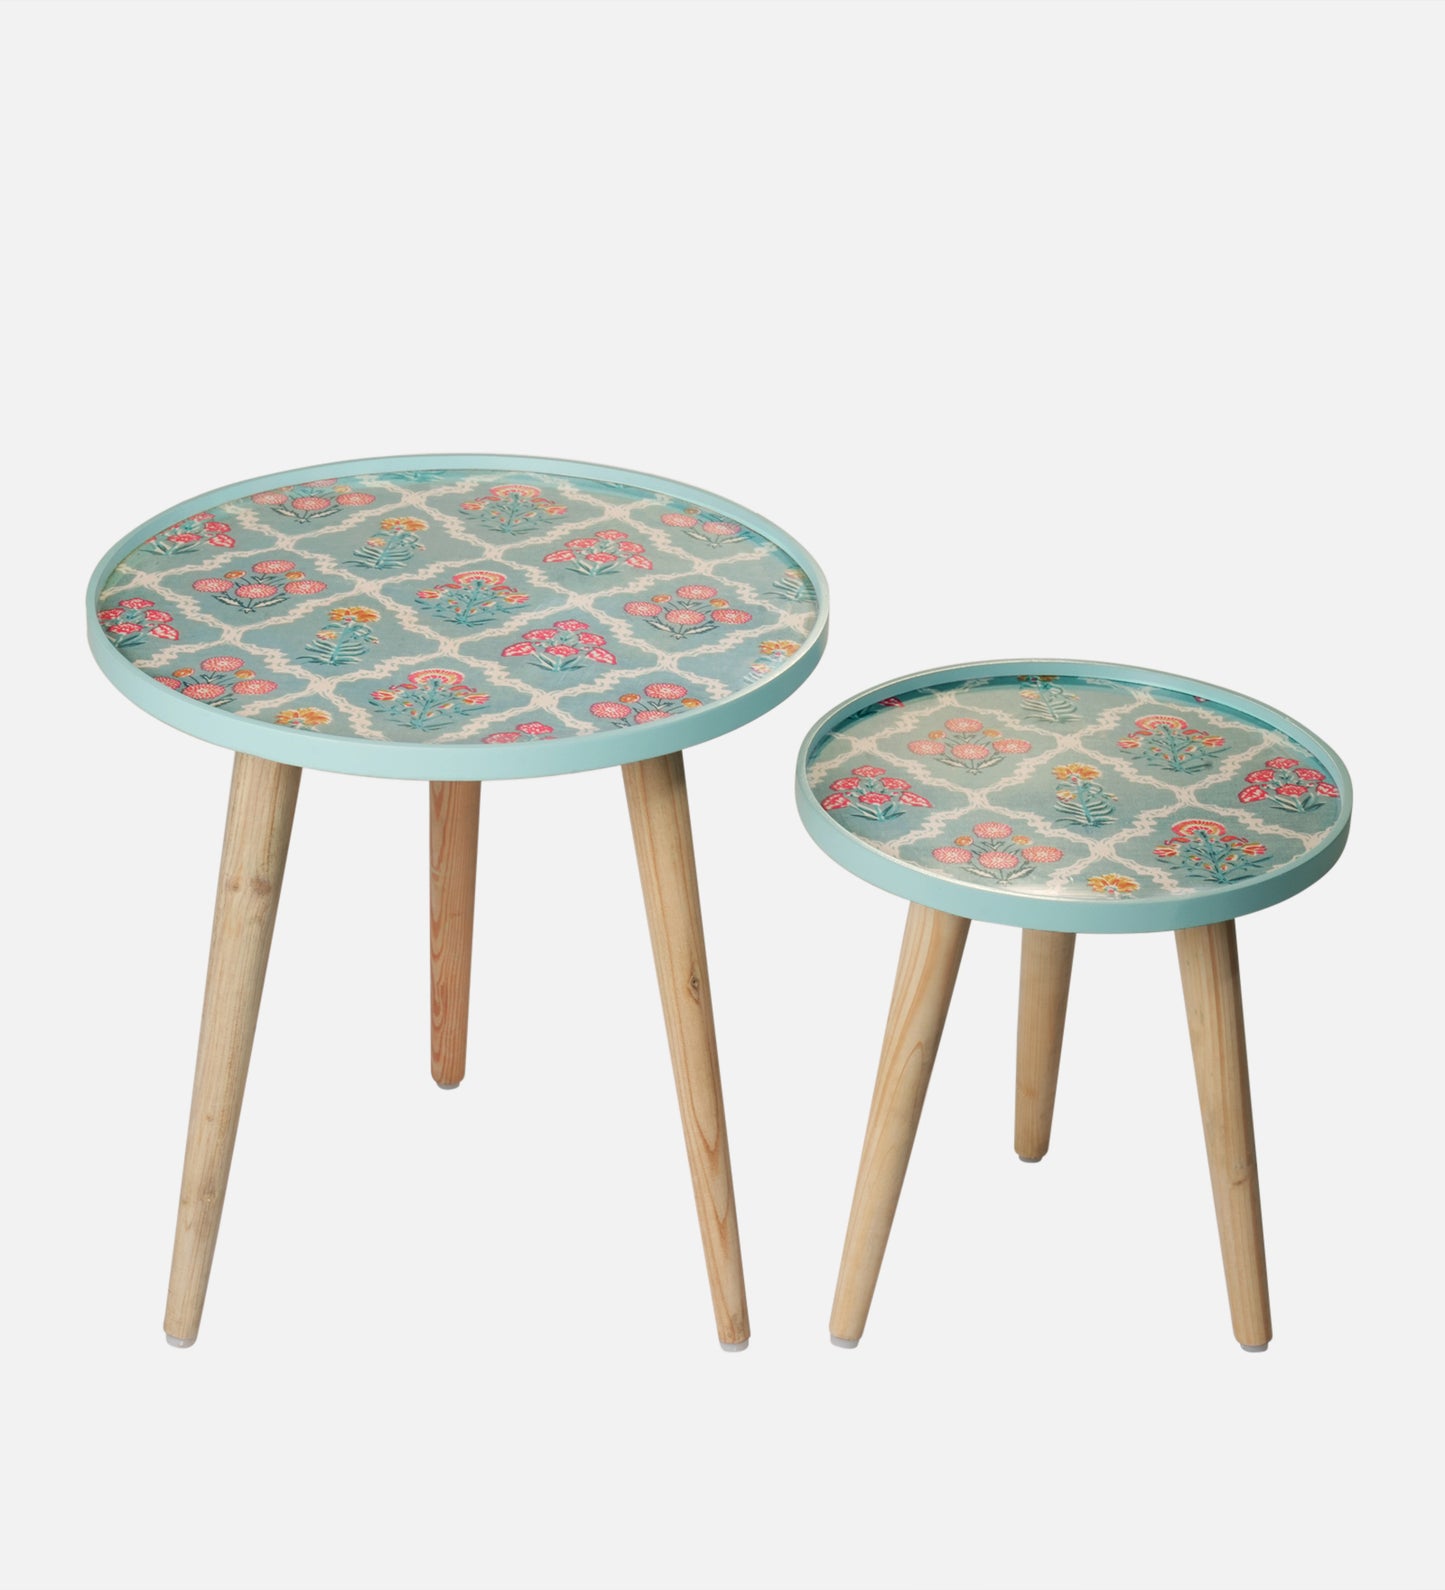 Phool Round Nesting Tables with Wooden Legs, Side Tables, Wooden Tables, Living Room Decor by A Tiny Mistake